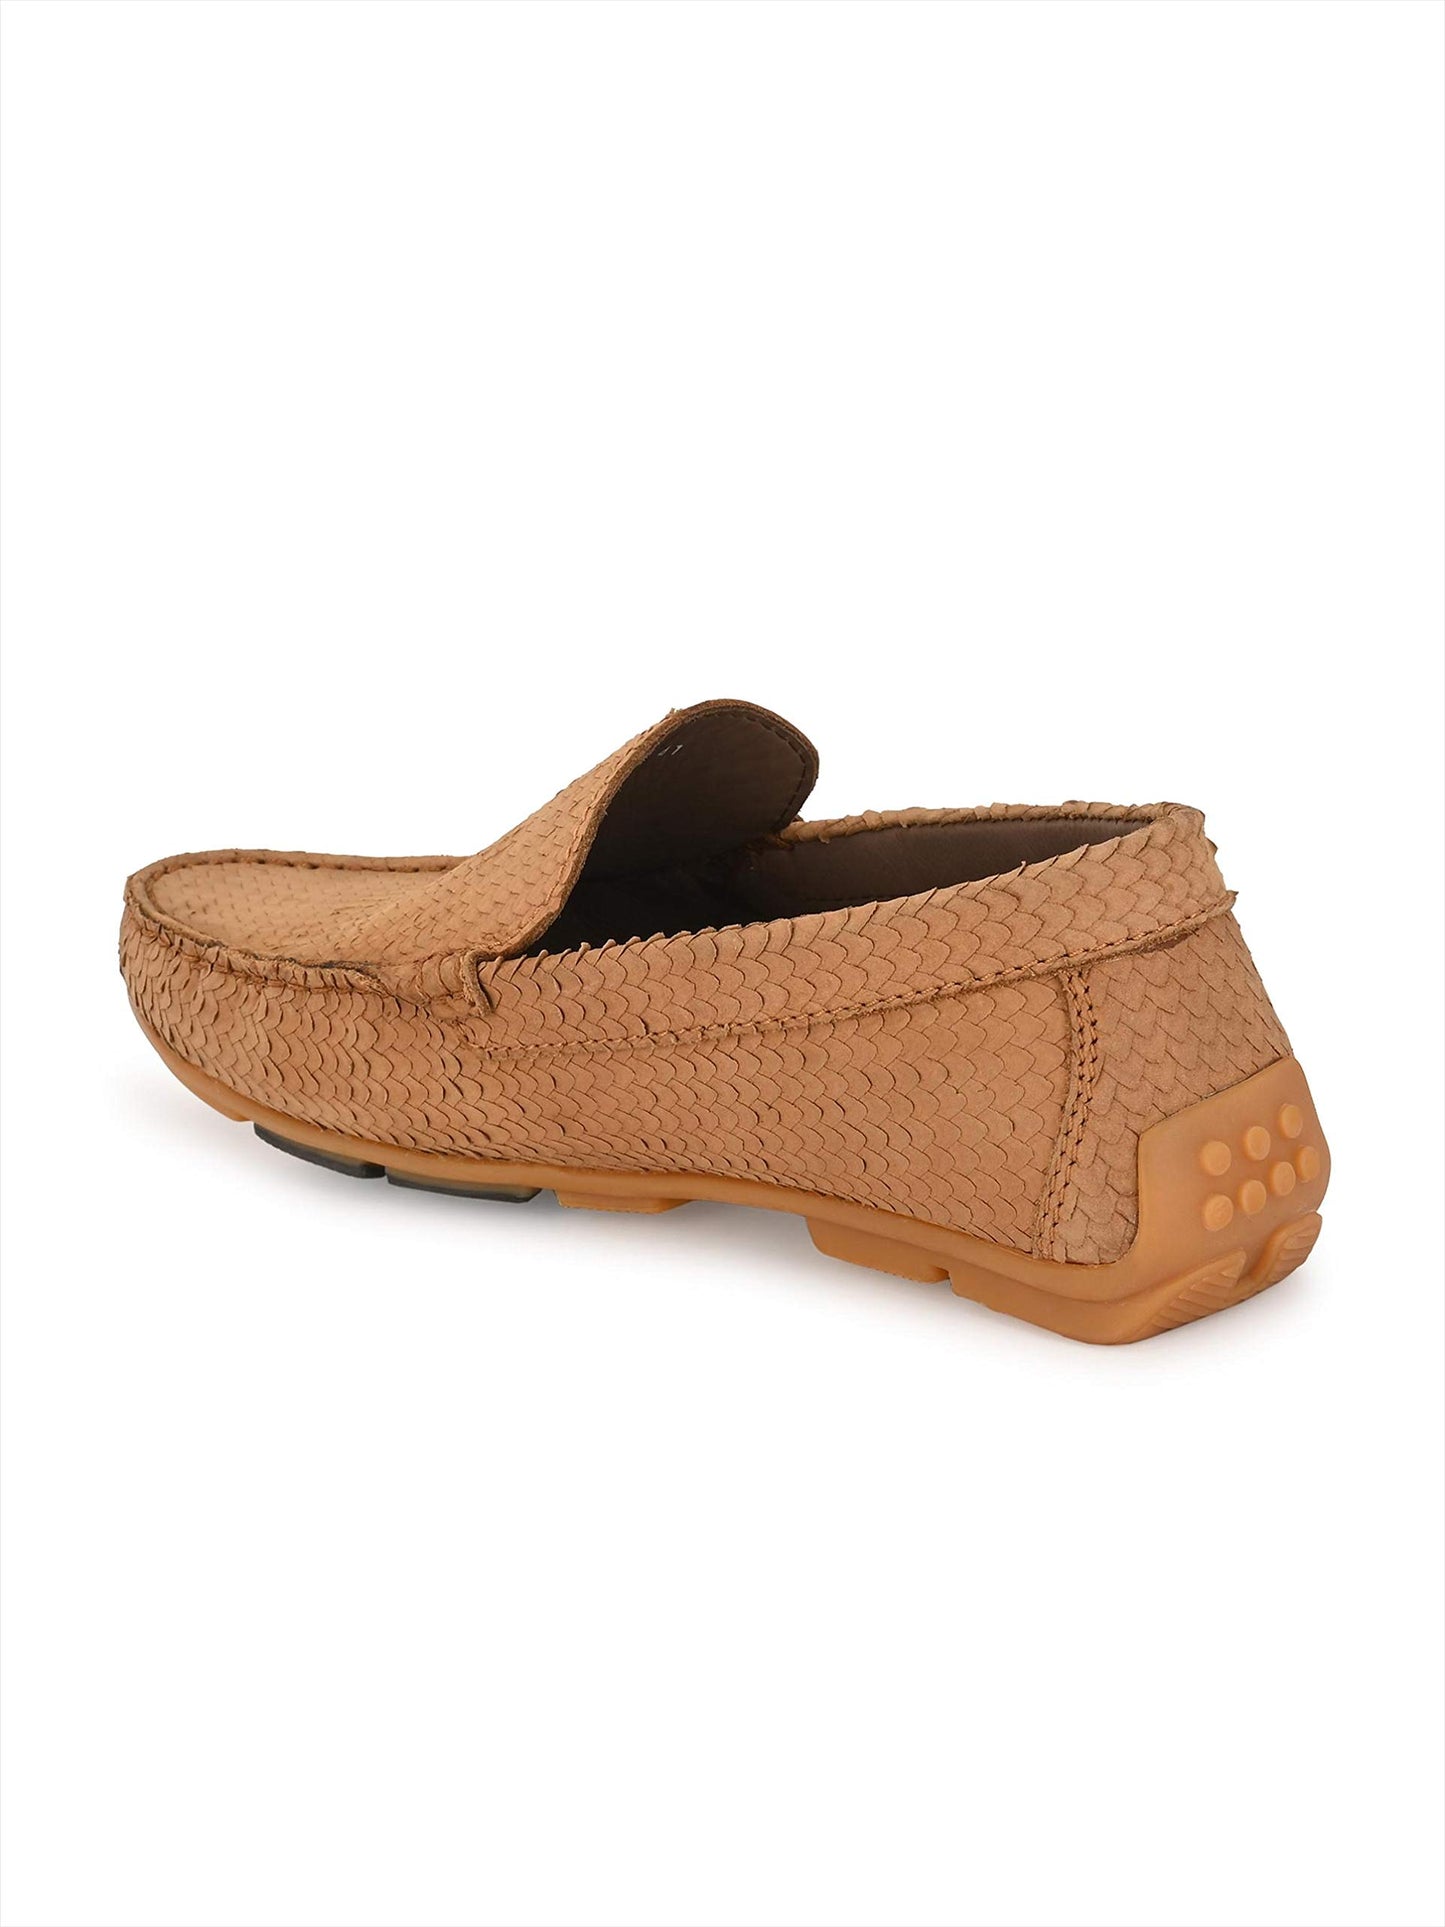 HITZ Men's Tan Leather Moccasins Loafer Shoes